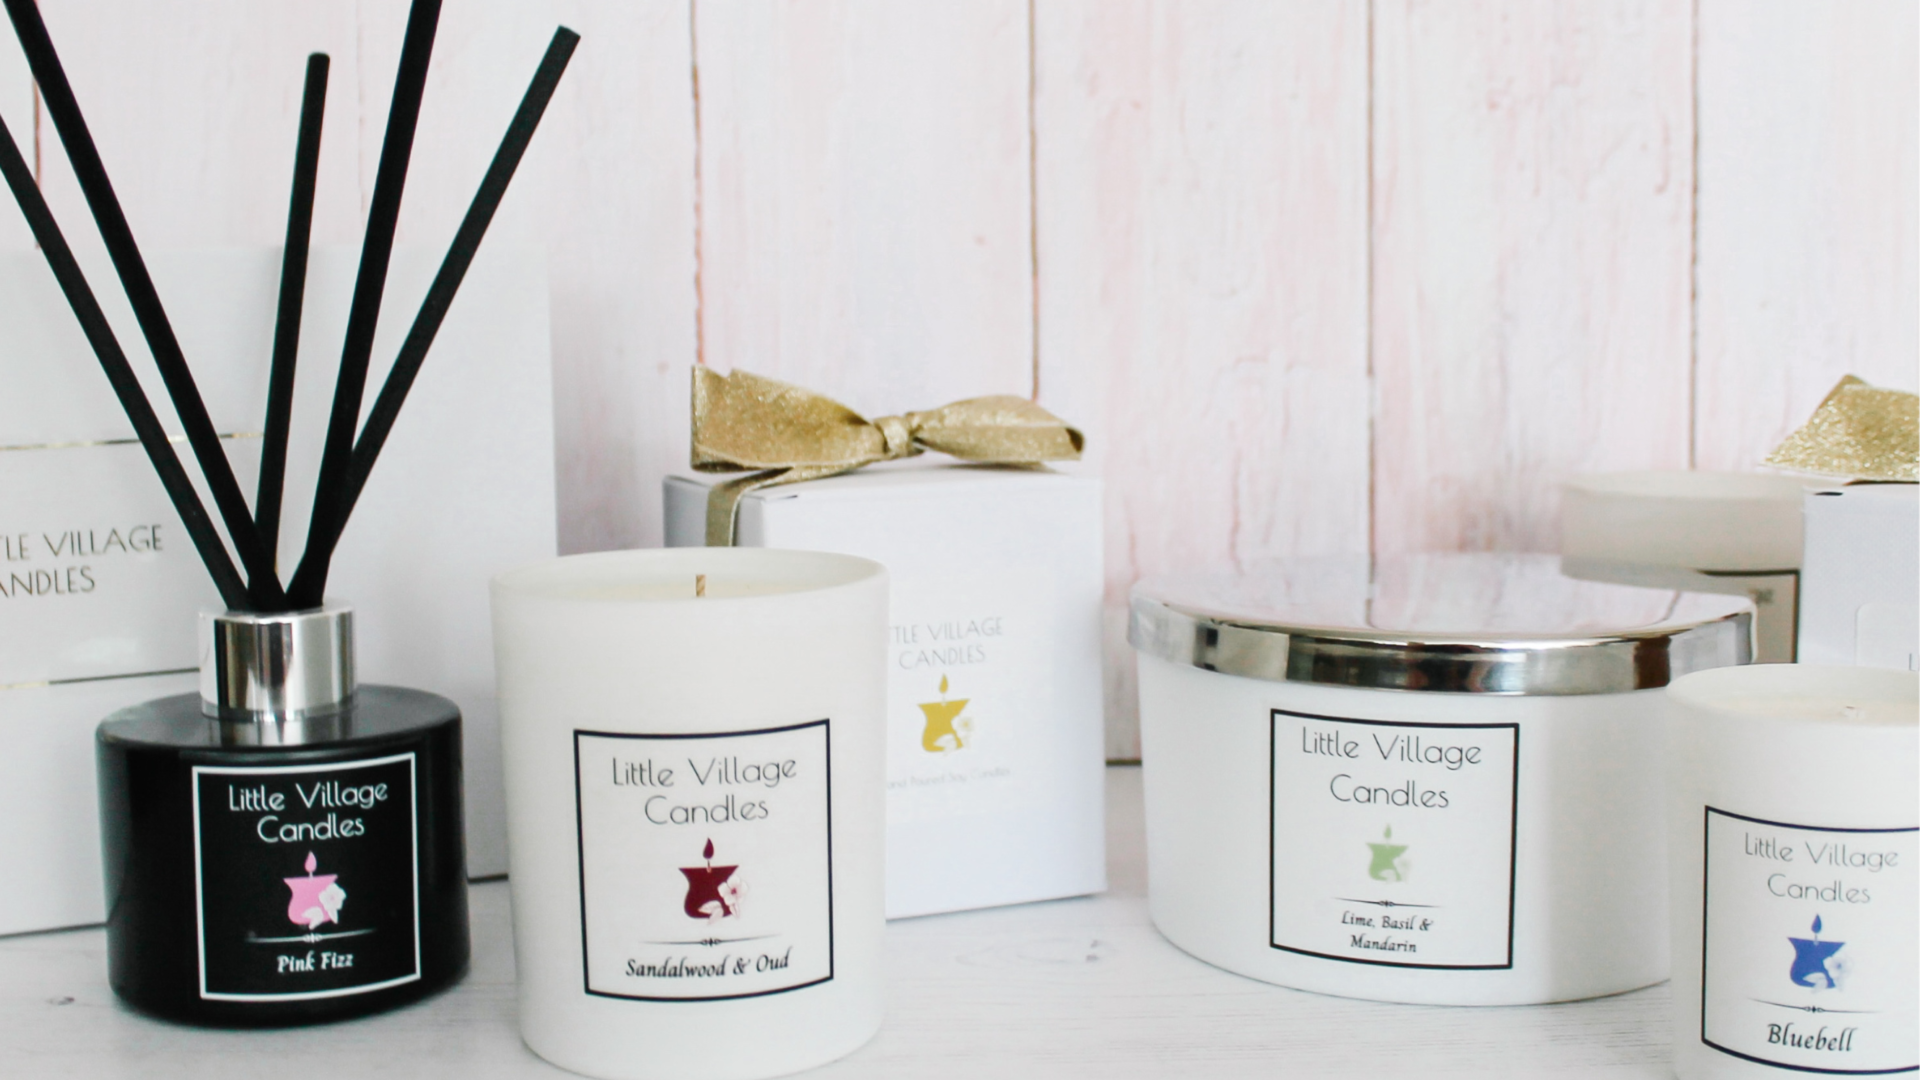 A range of candles and diffusers from Little Village Candles